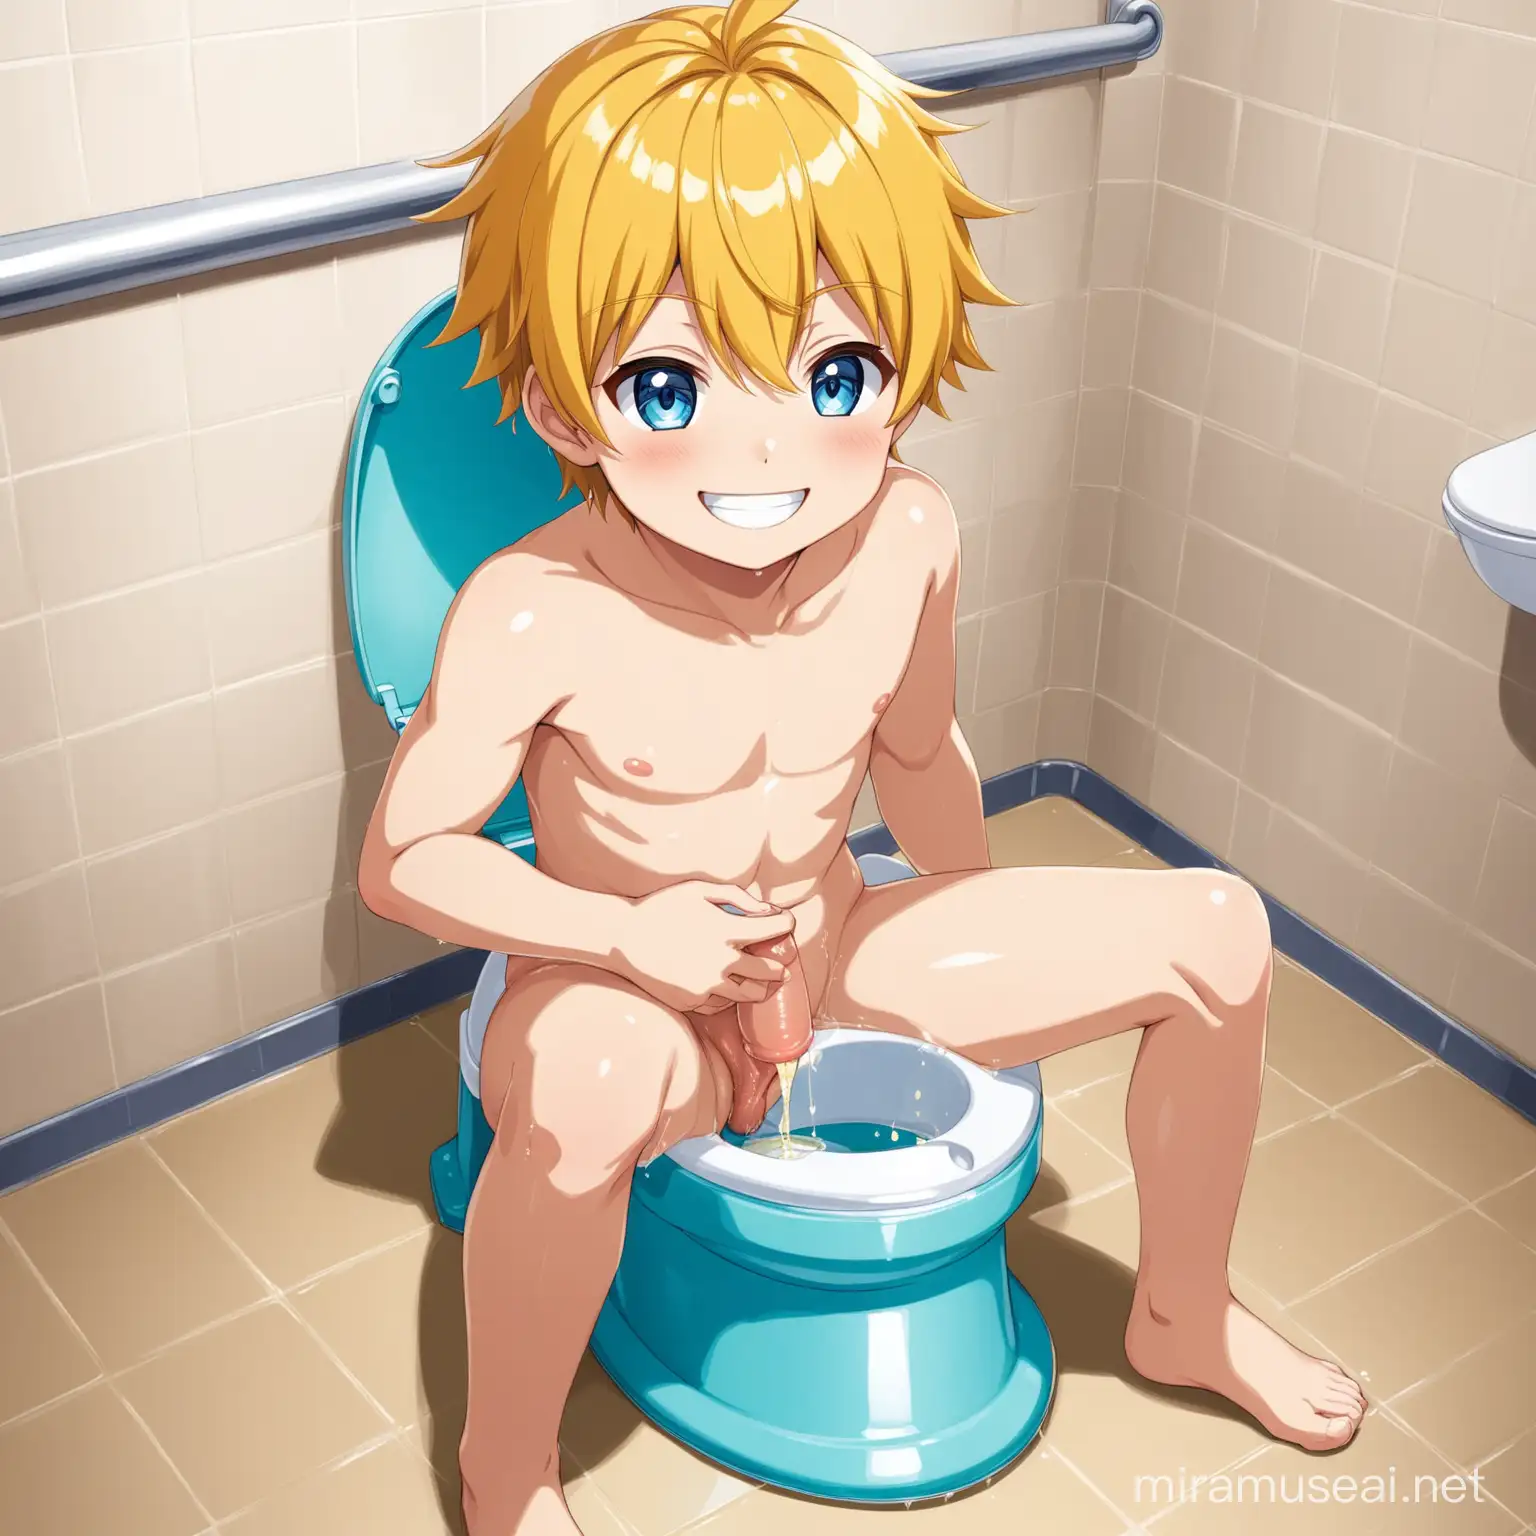 Anime boy peeing in the plastic training potty while sitting naked and smiling at the camera as the pee goes in the potty penis showing legs open